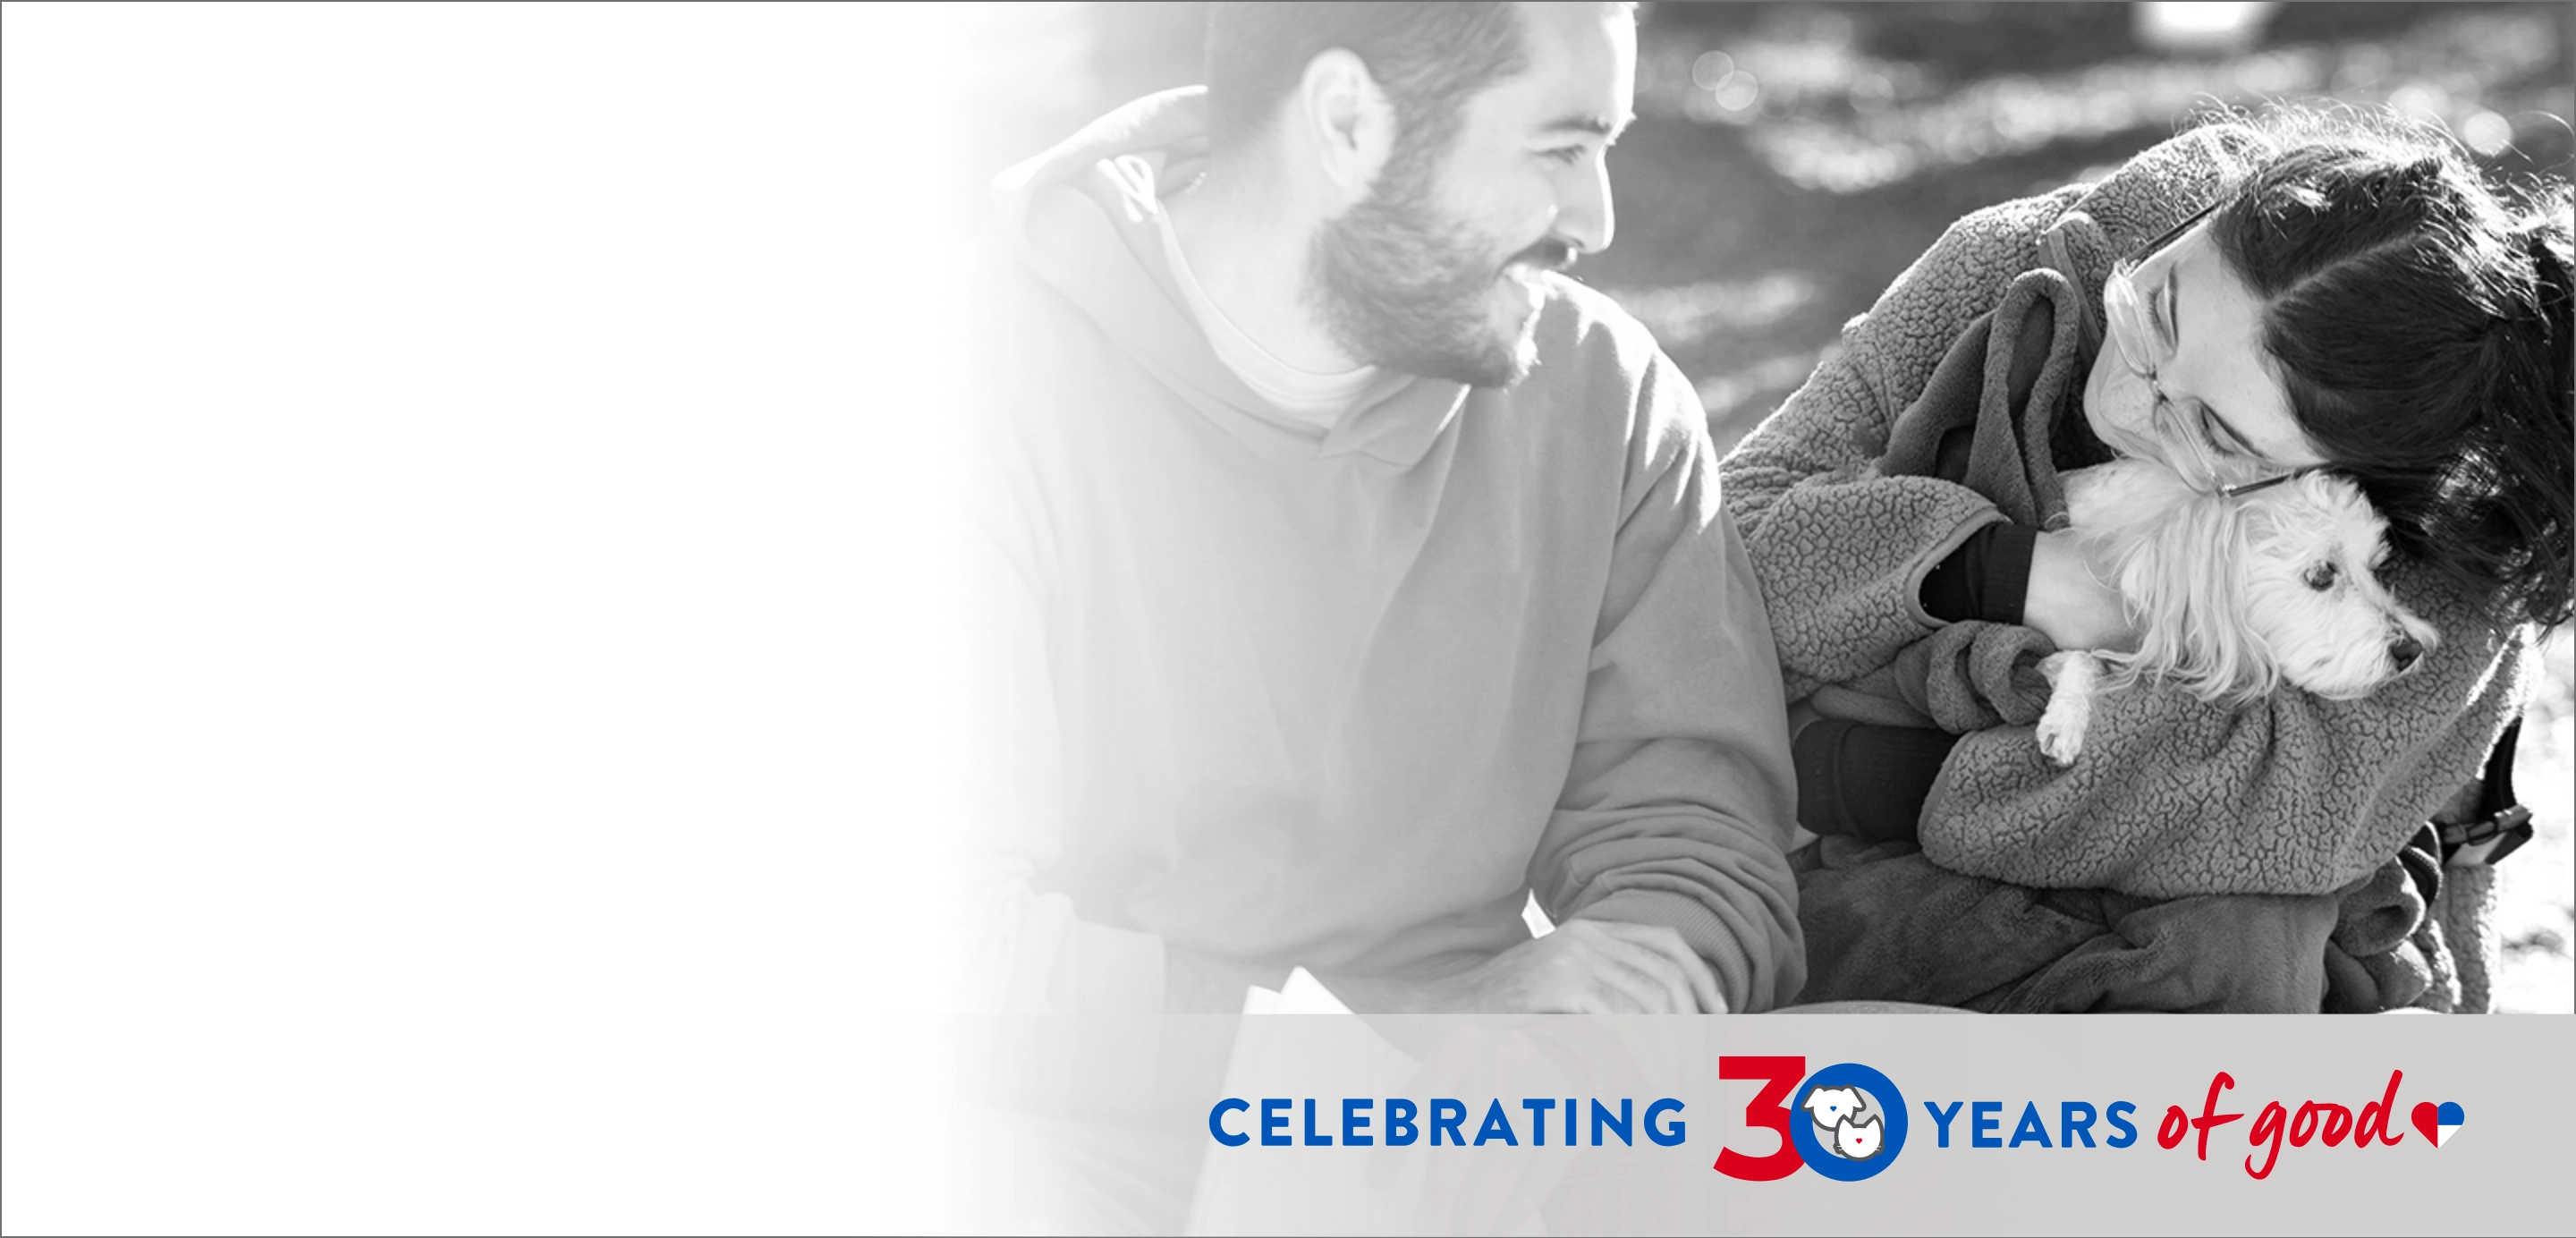 Man looks at a woman hugging a small dog in her arms, text that reads "Celebrating 30 years of Good"